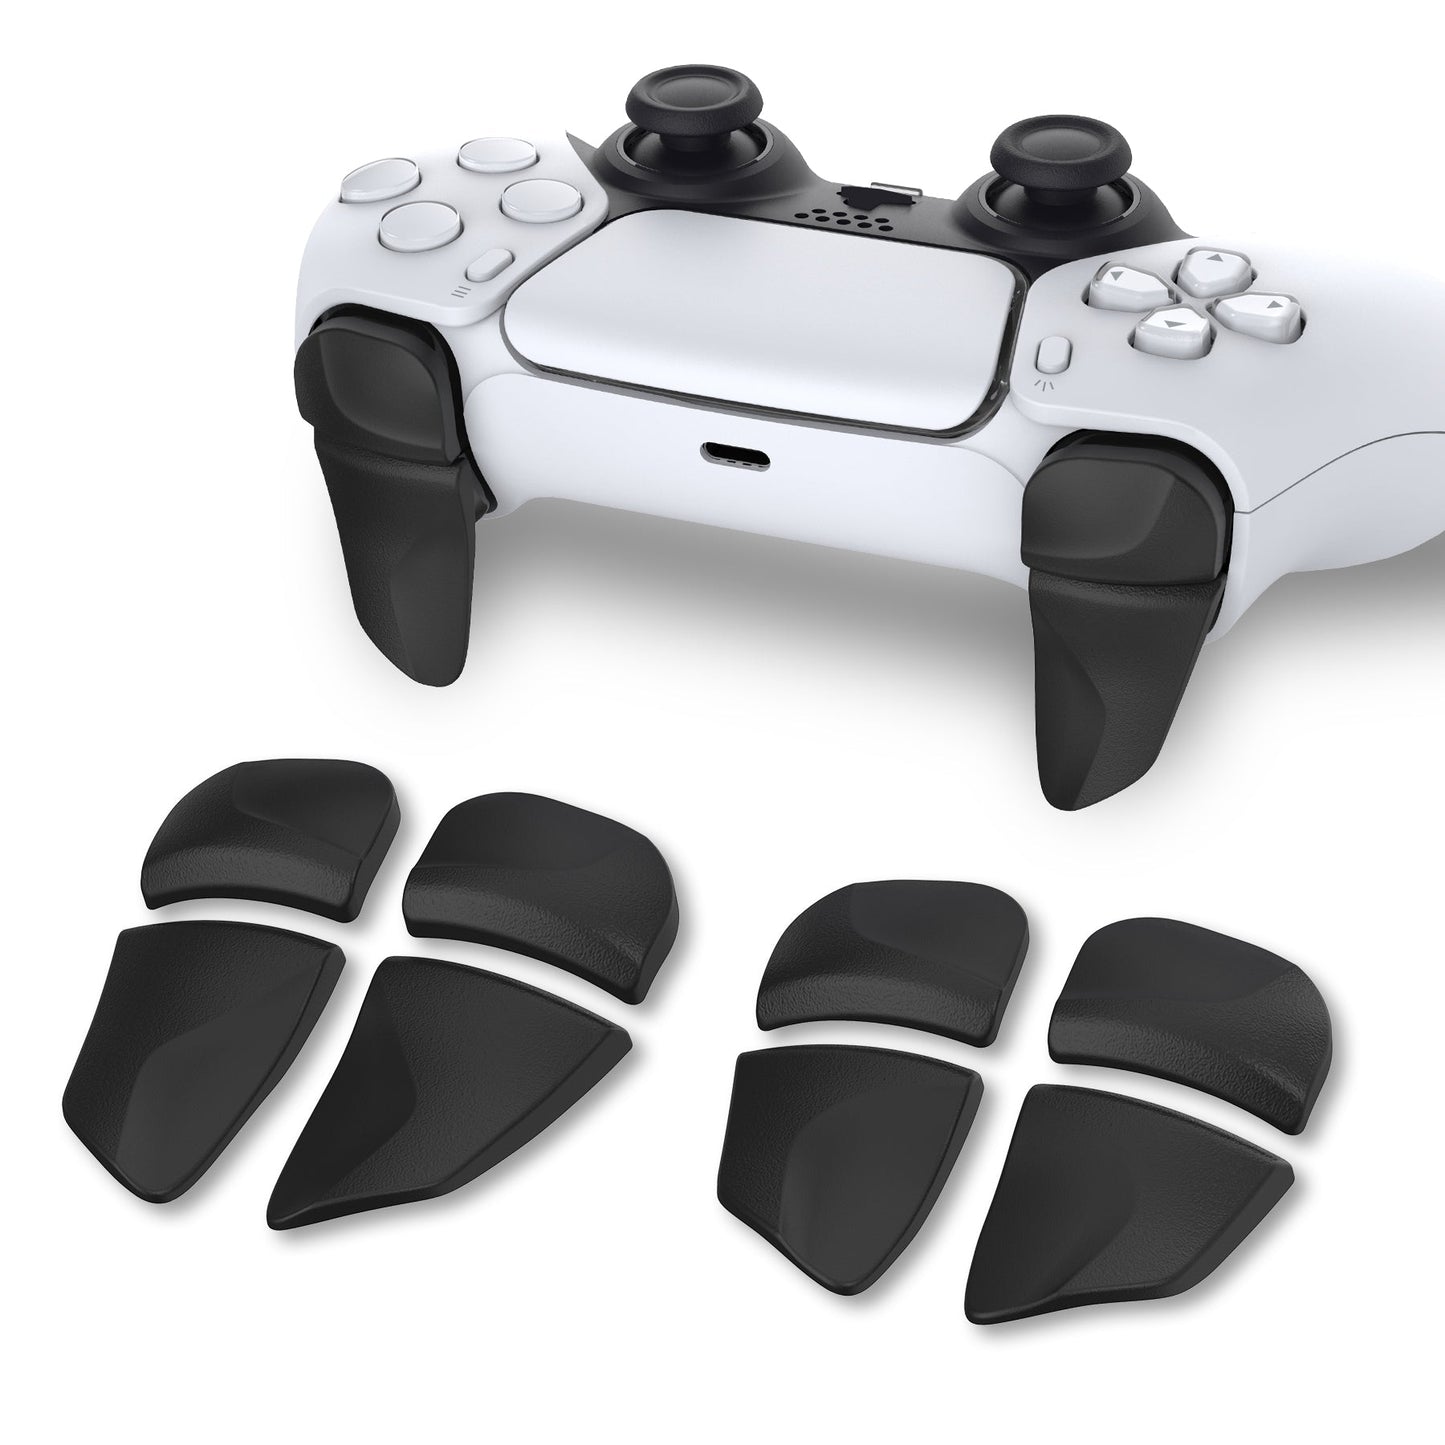 PlayVital Black 2 Pair Shoulder Buttons Extension Triggers for PS5 Controller, Game Improvement Adjusters for PS5 Controller, Bumper Trigger Extenders for PS5 Controller - PFPJ039 PlayVital